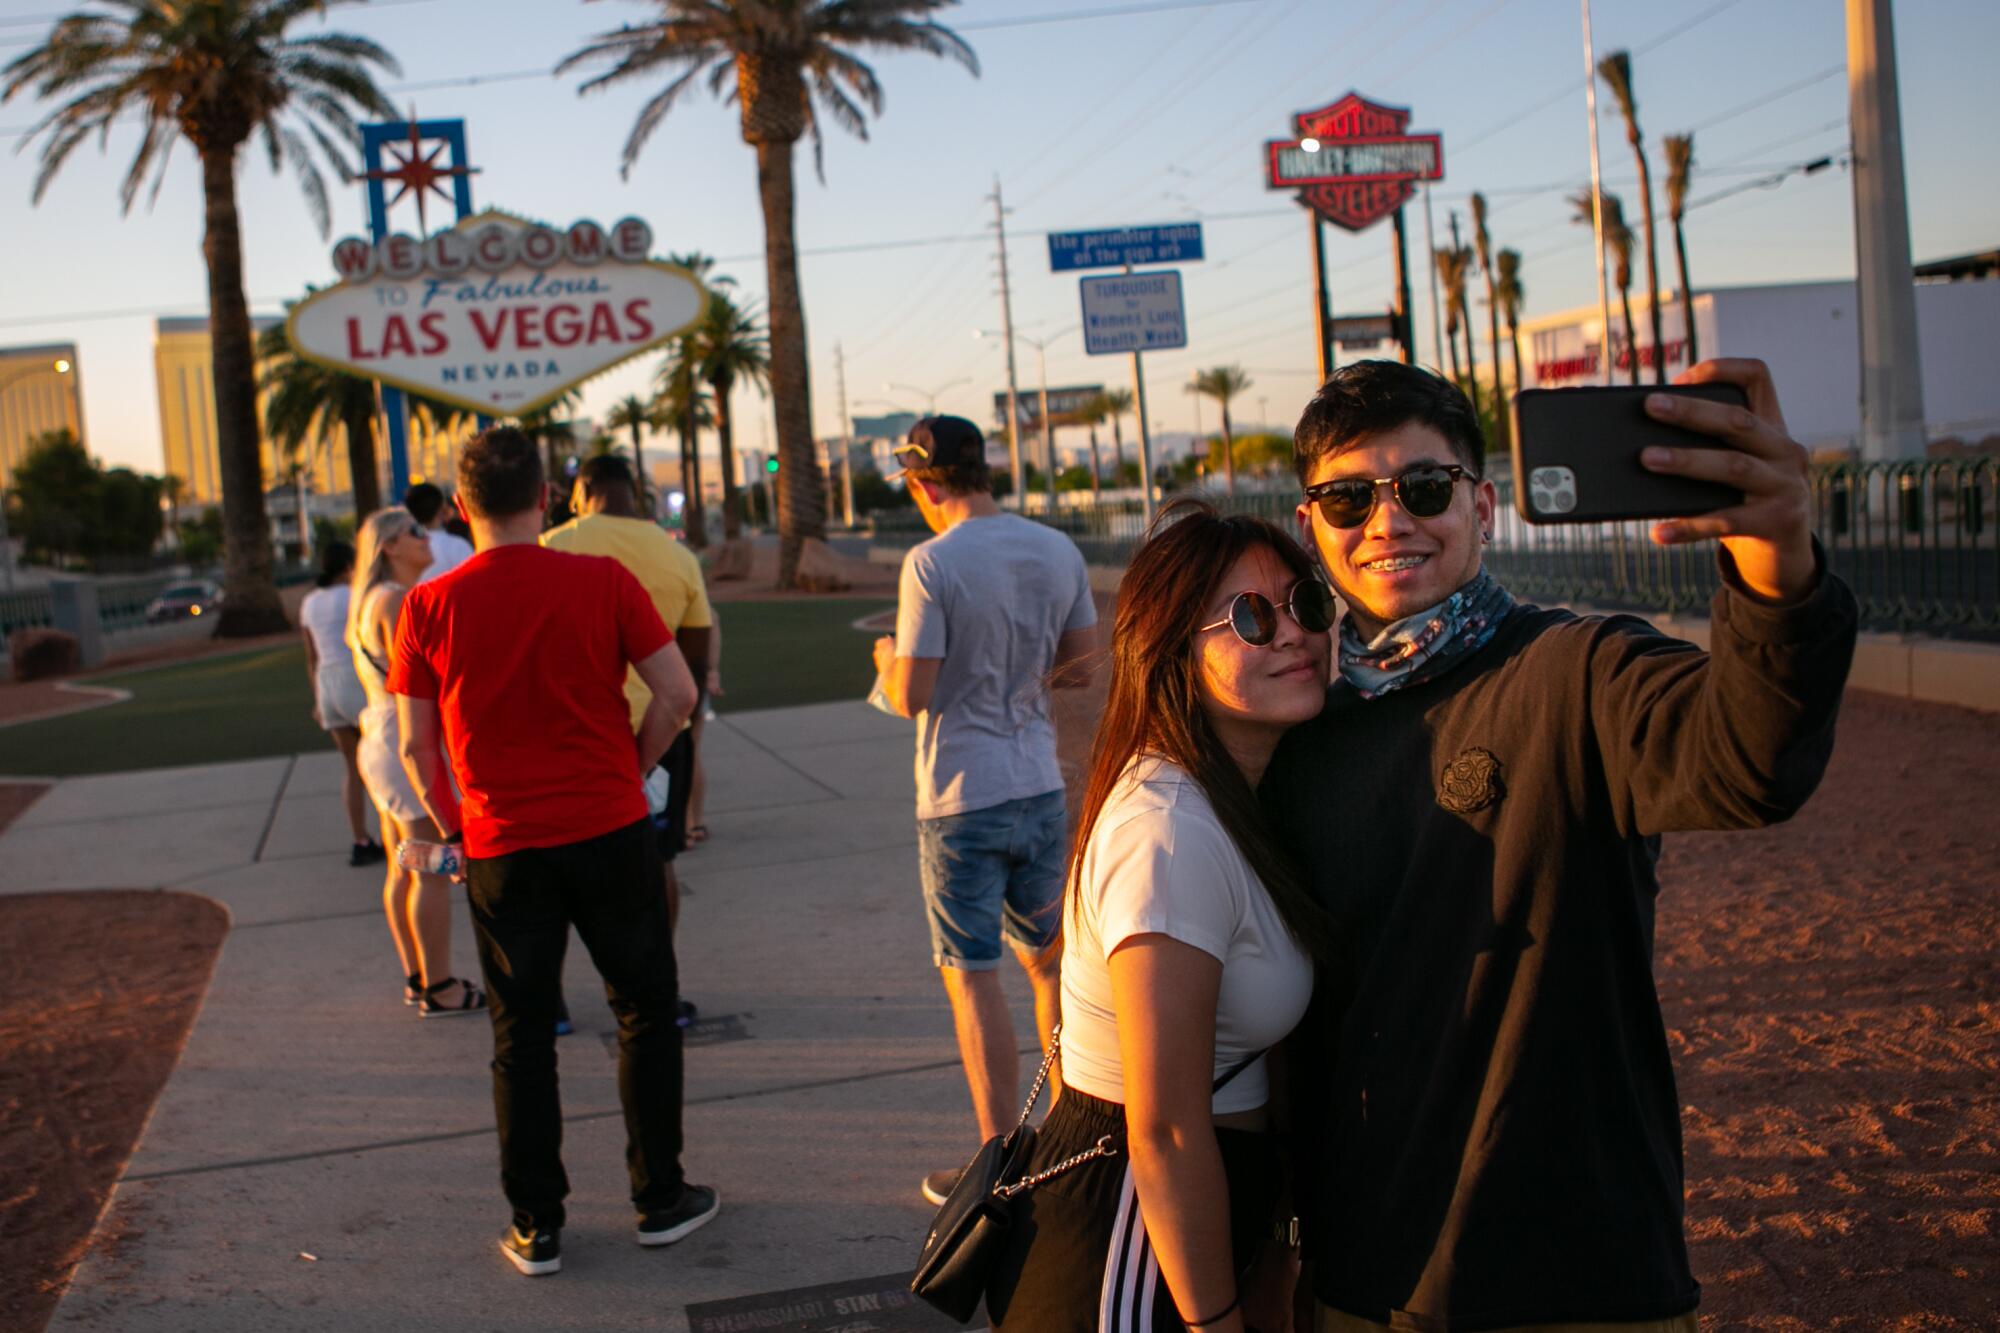 People stop to take photos at the iconic Welcome to Las Vegas sign 